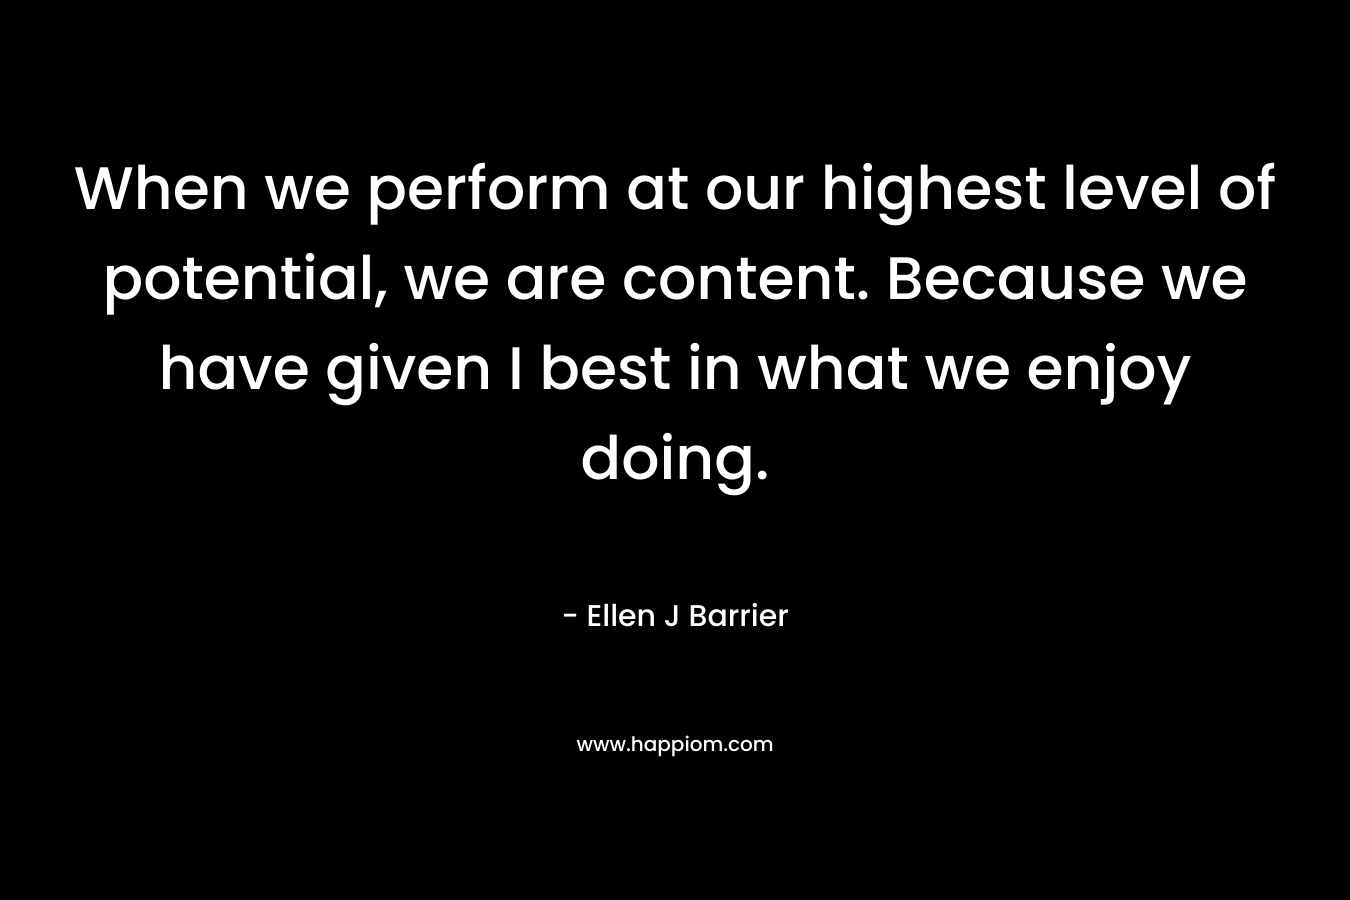 When we perform at our highest level of potential, we are content. Because we have given I best in what we enjoy doing. – Ellen J Barrier